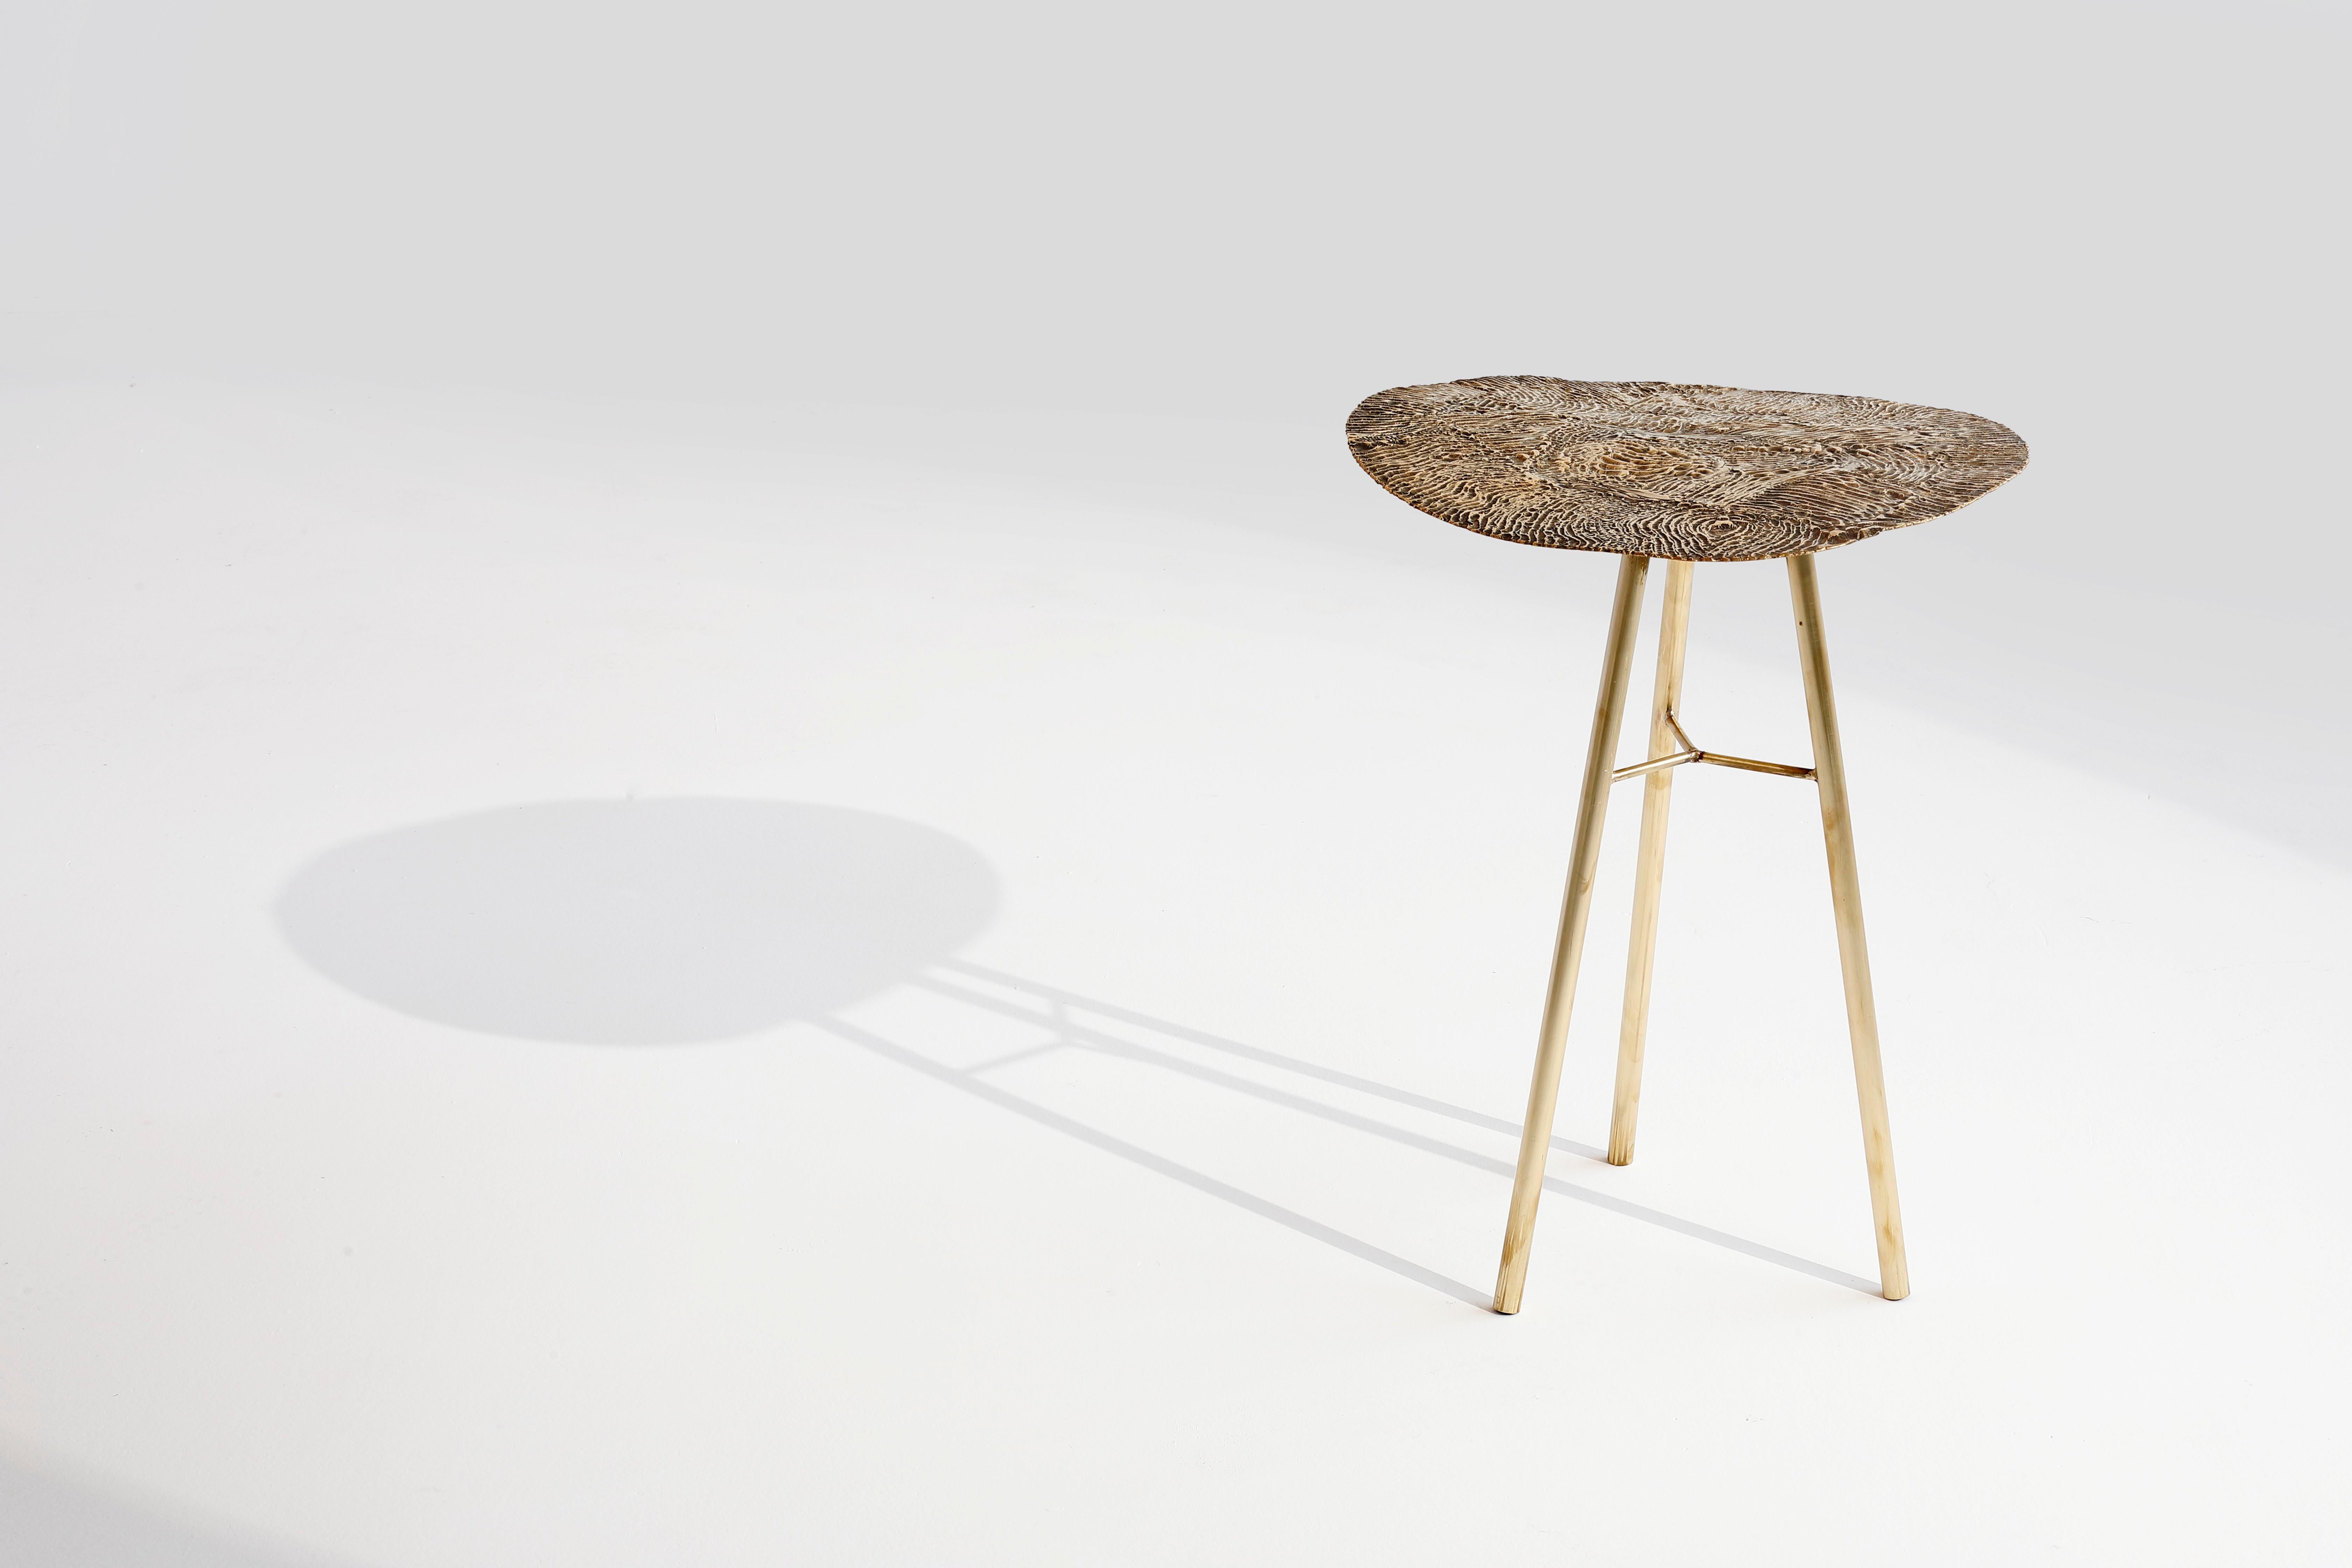 Brass hand-sculpted side table by Samuel Costantini
Entirely handmade by the artist
Title: Golden Waves
Edition 15 + 2 AP
Measures: Diameter 500m, height 550 mm.
Diameter 19.685, height 21.653 inches

Time leaves its mark on everything. Its